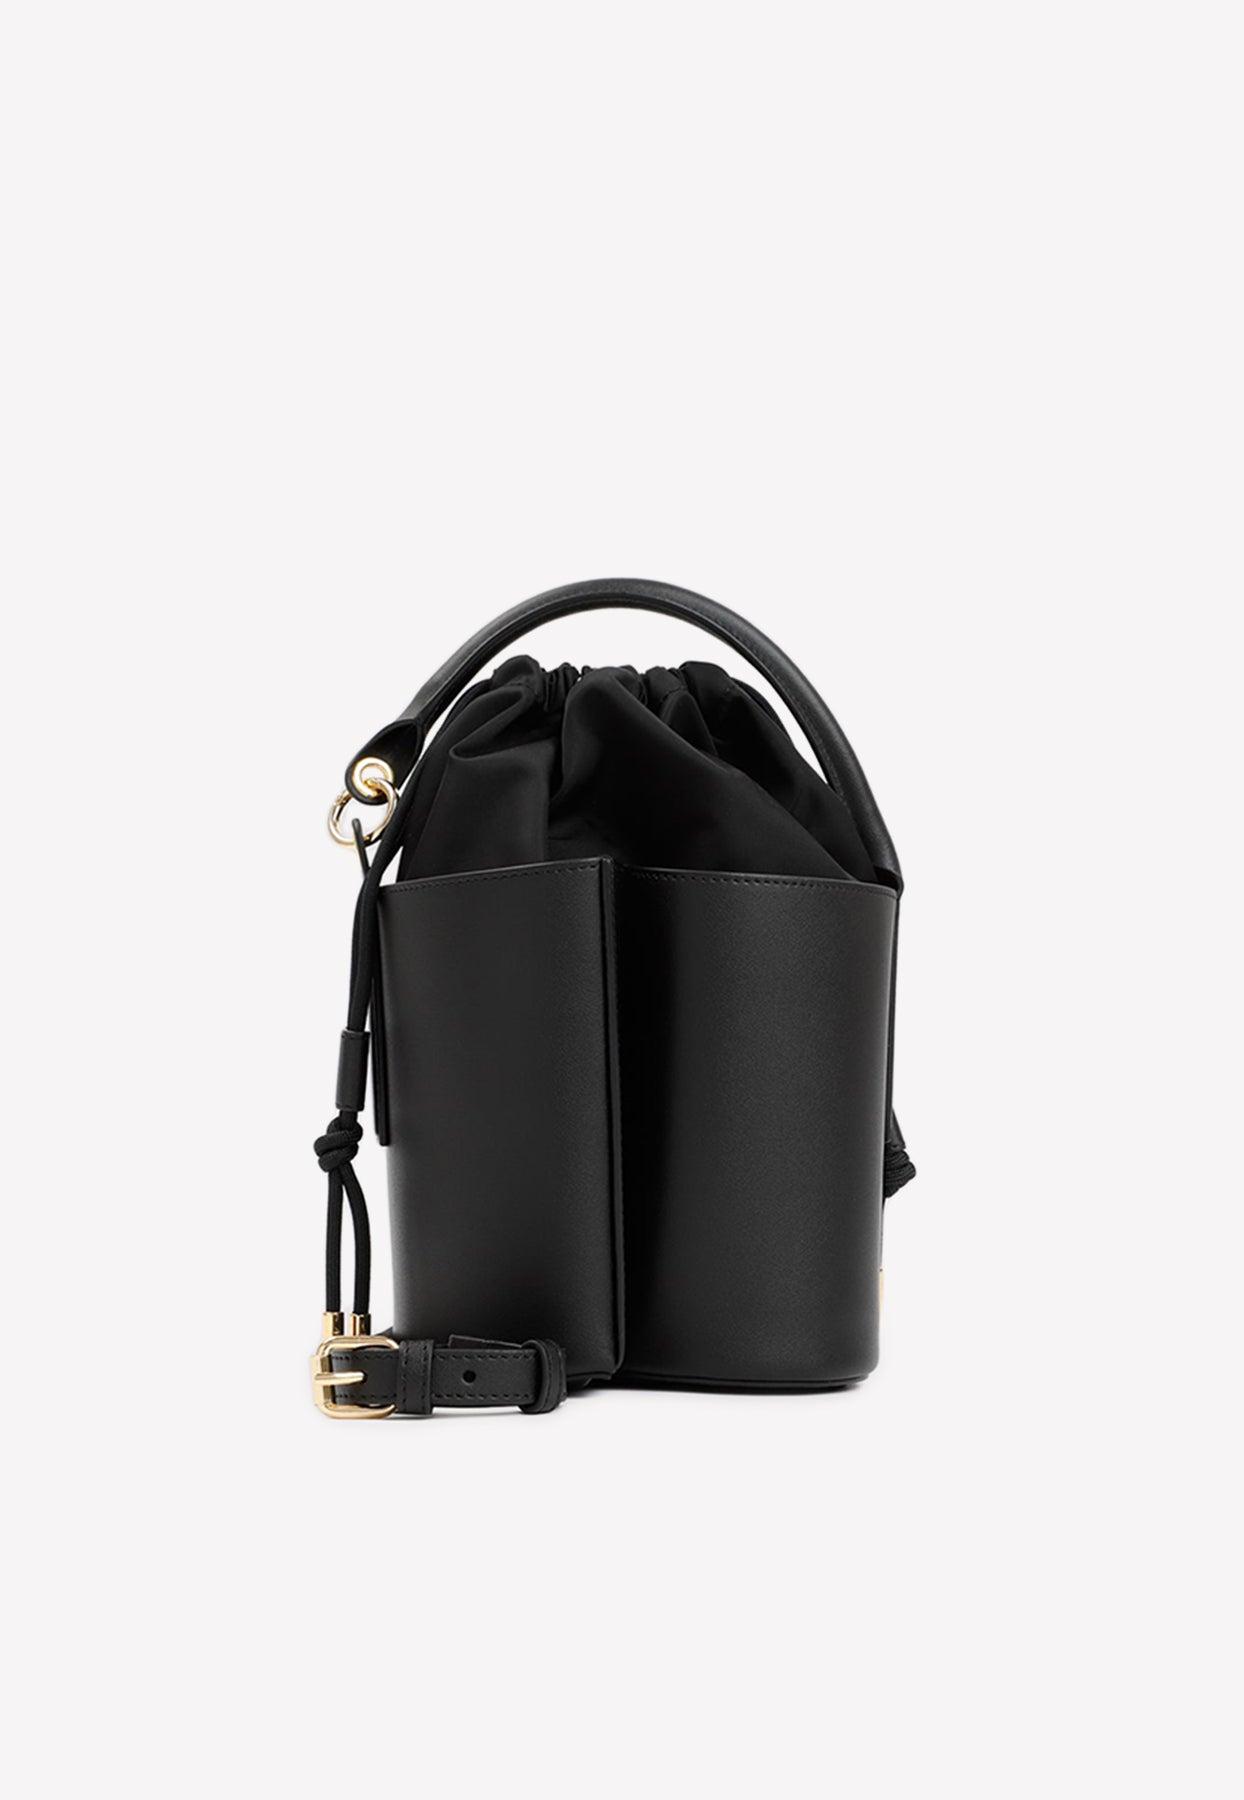 Sacai Small Leather Bucket Bag in Black | Lyst